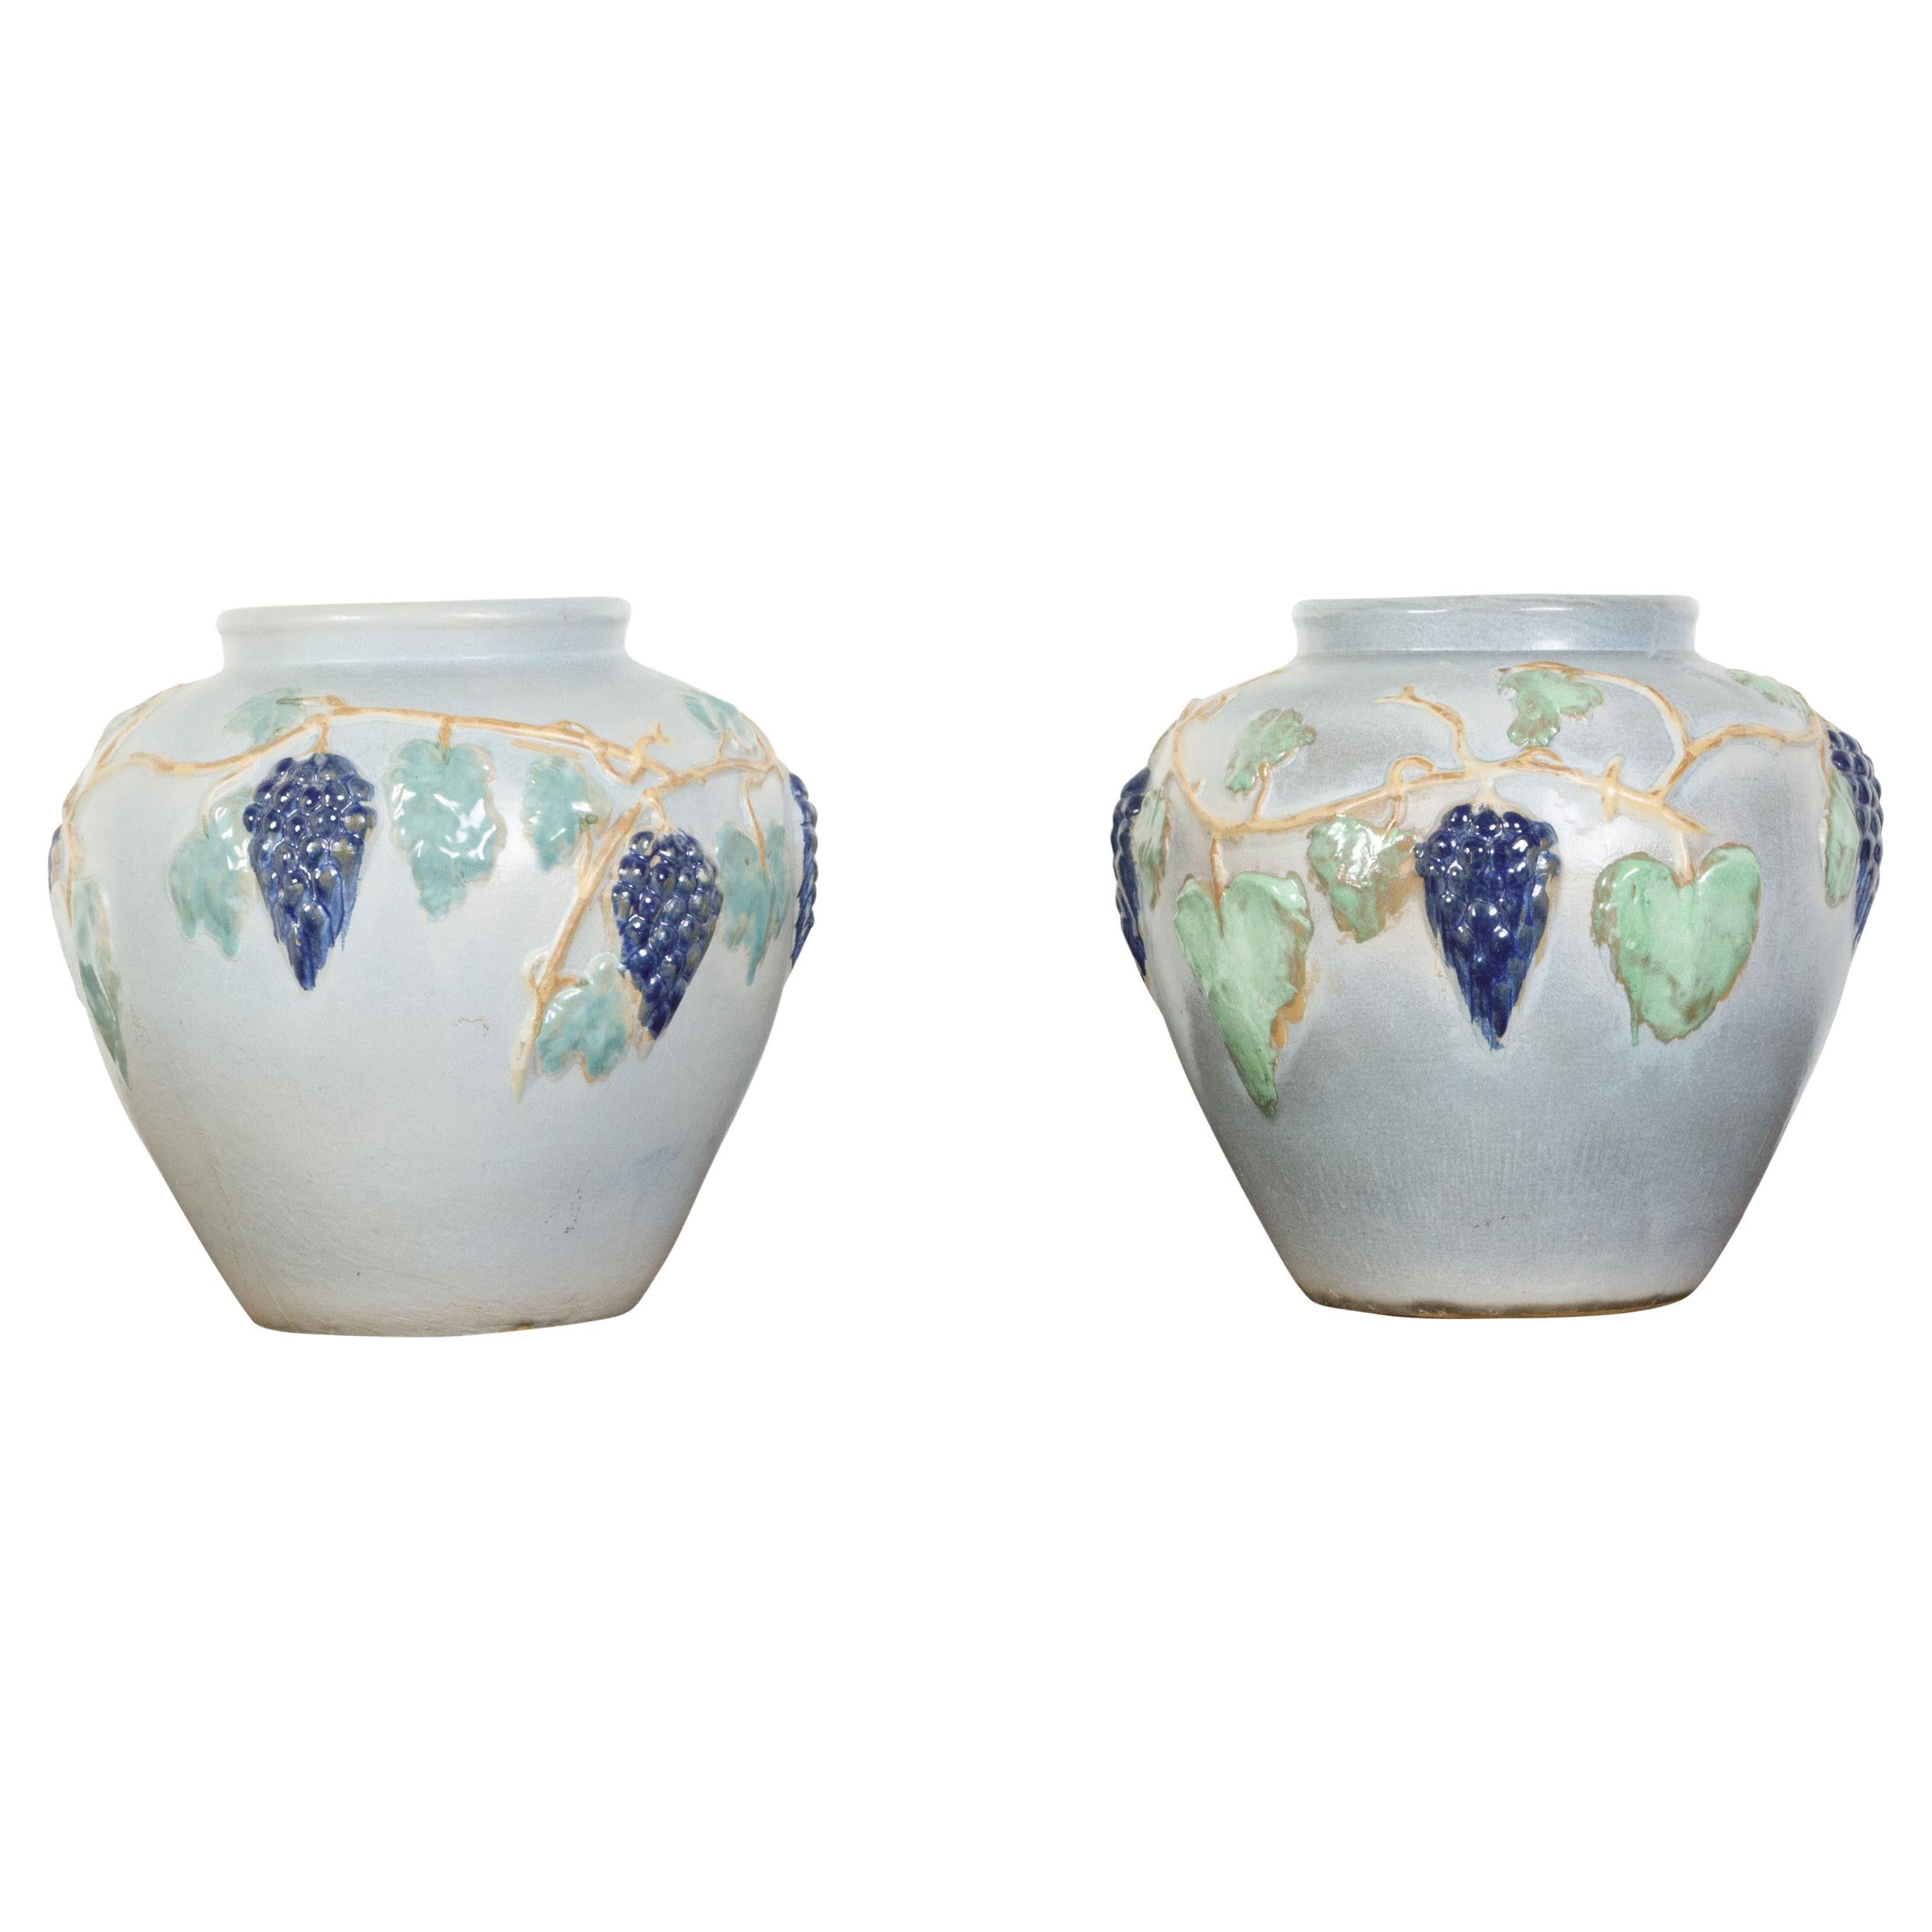 Pair of 1920s American Stoneware Pottery Planters with Grapevine Décor For Sale